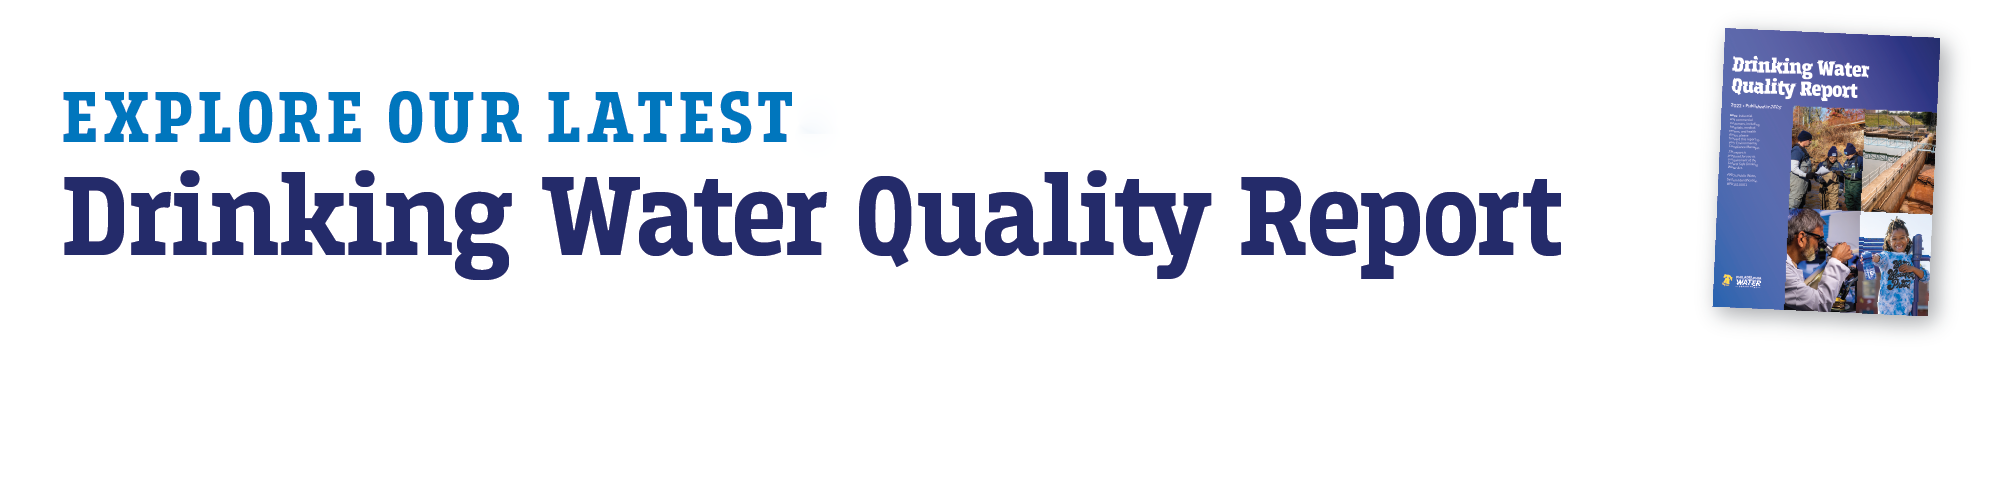 Explore our latest Drinking Water Quality Report